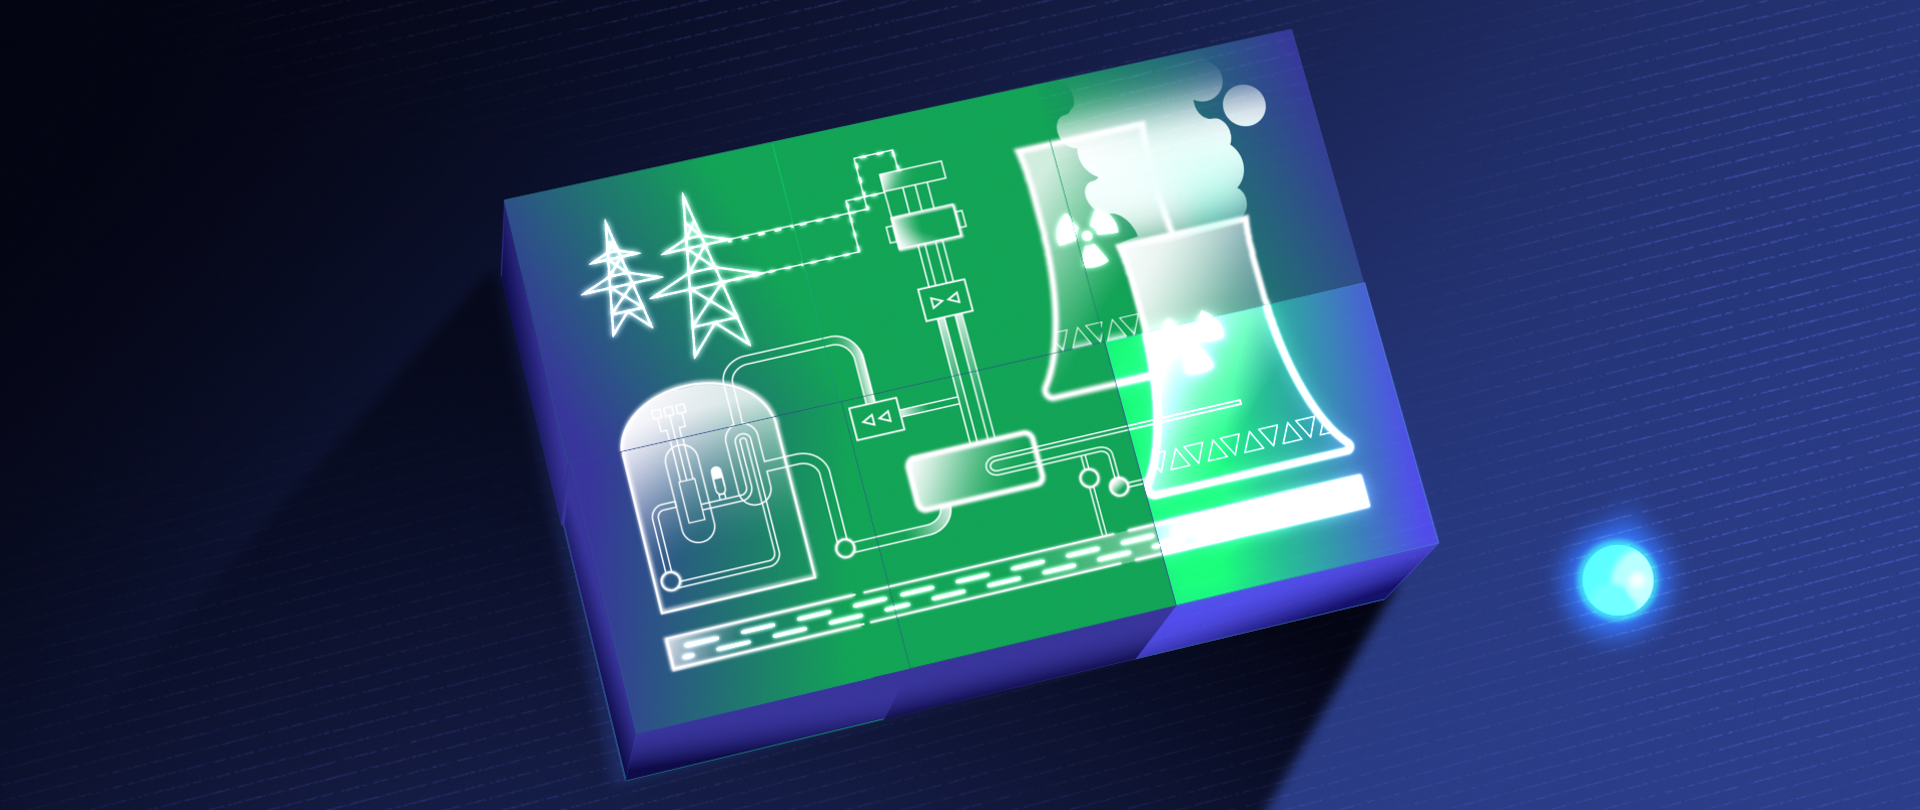 Graphics showing a nuclear power plant. The white elements of the power plant were placed on a green, spatial cuboid. The whole is on a shaded navy blue-violet background.